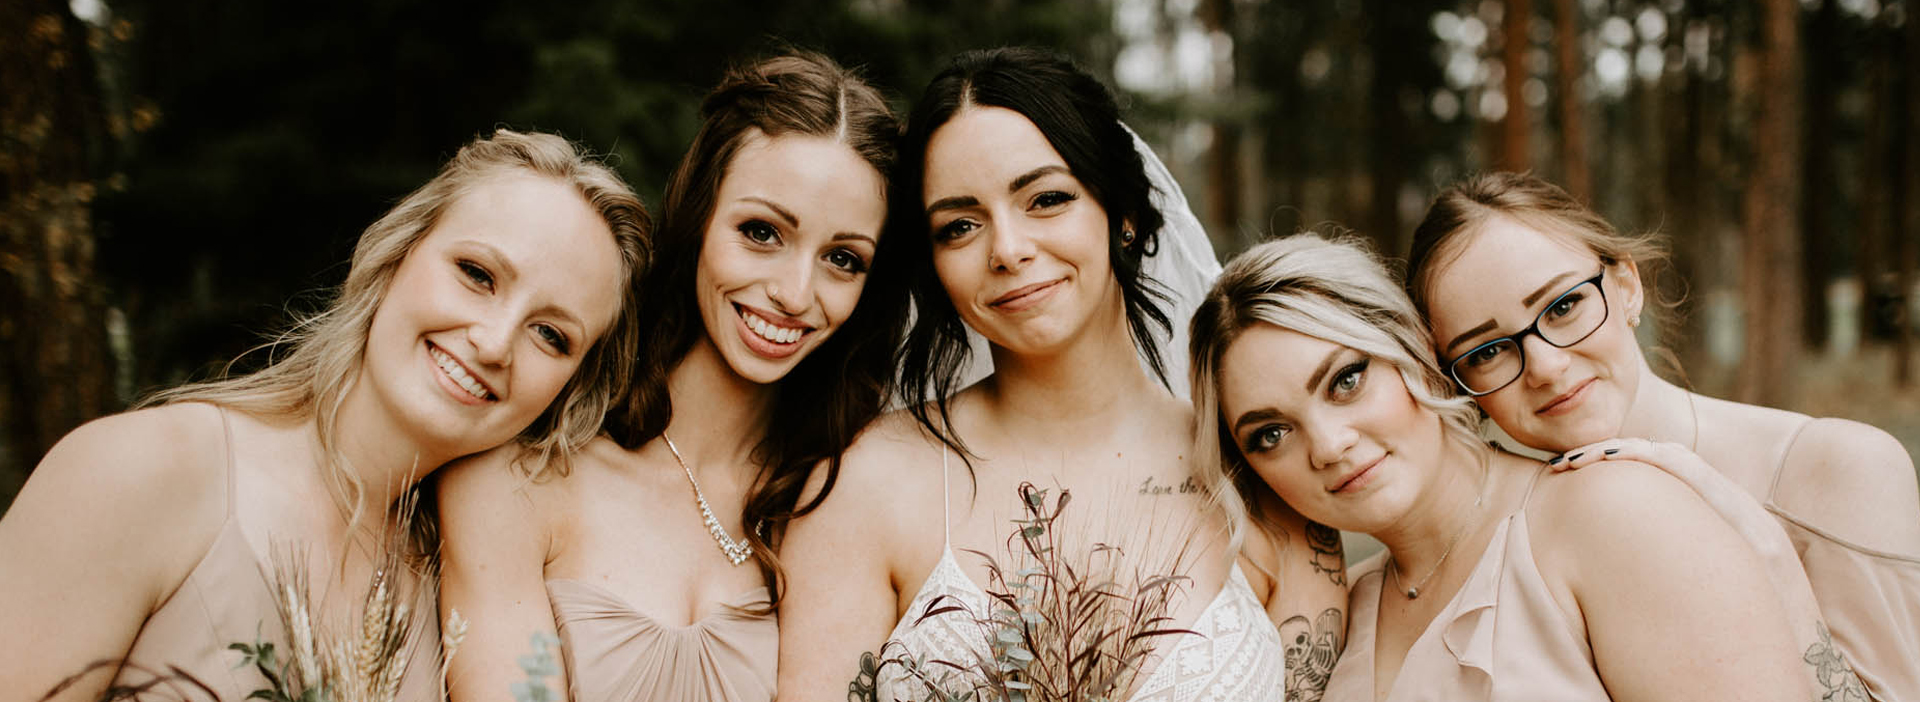 Bridal party wedding photos outdoors with makeup done by Top Notch Art of Makeup